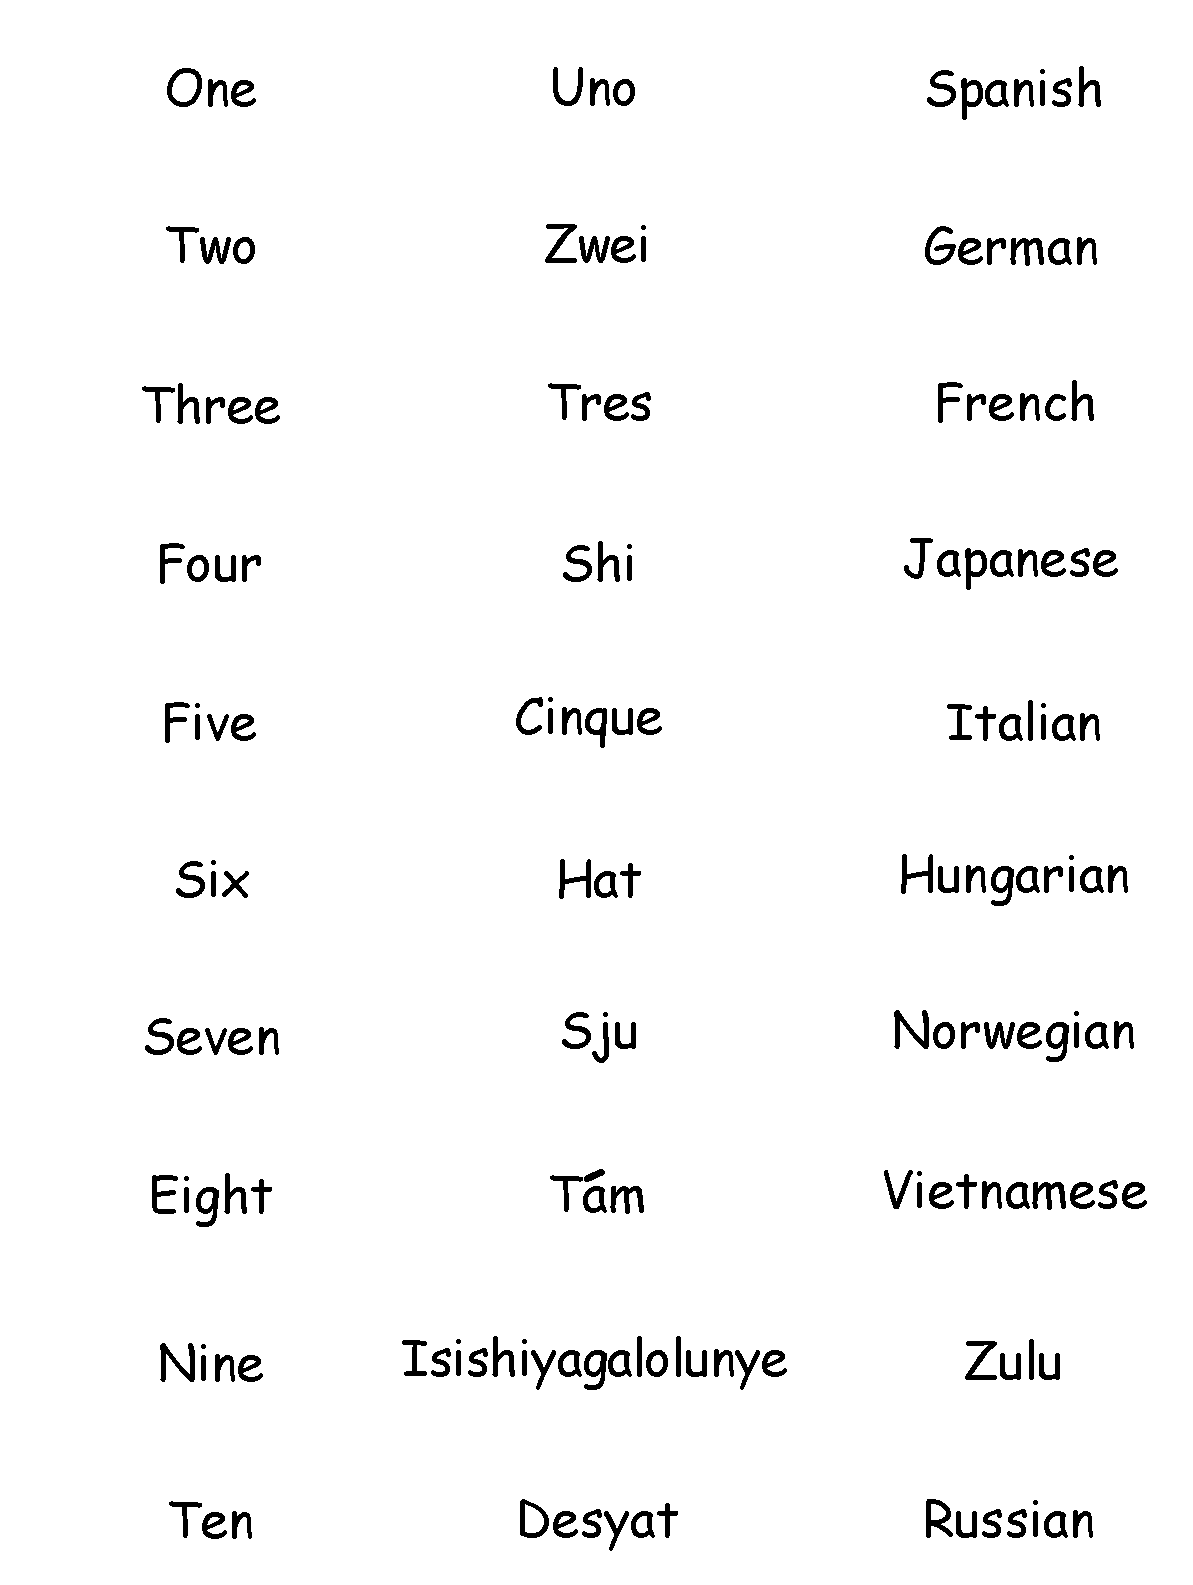 One through Ten in different languages, a matching activity.